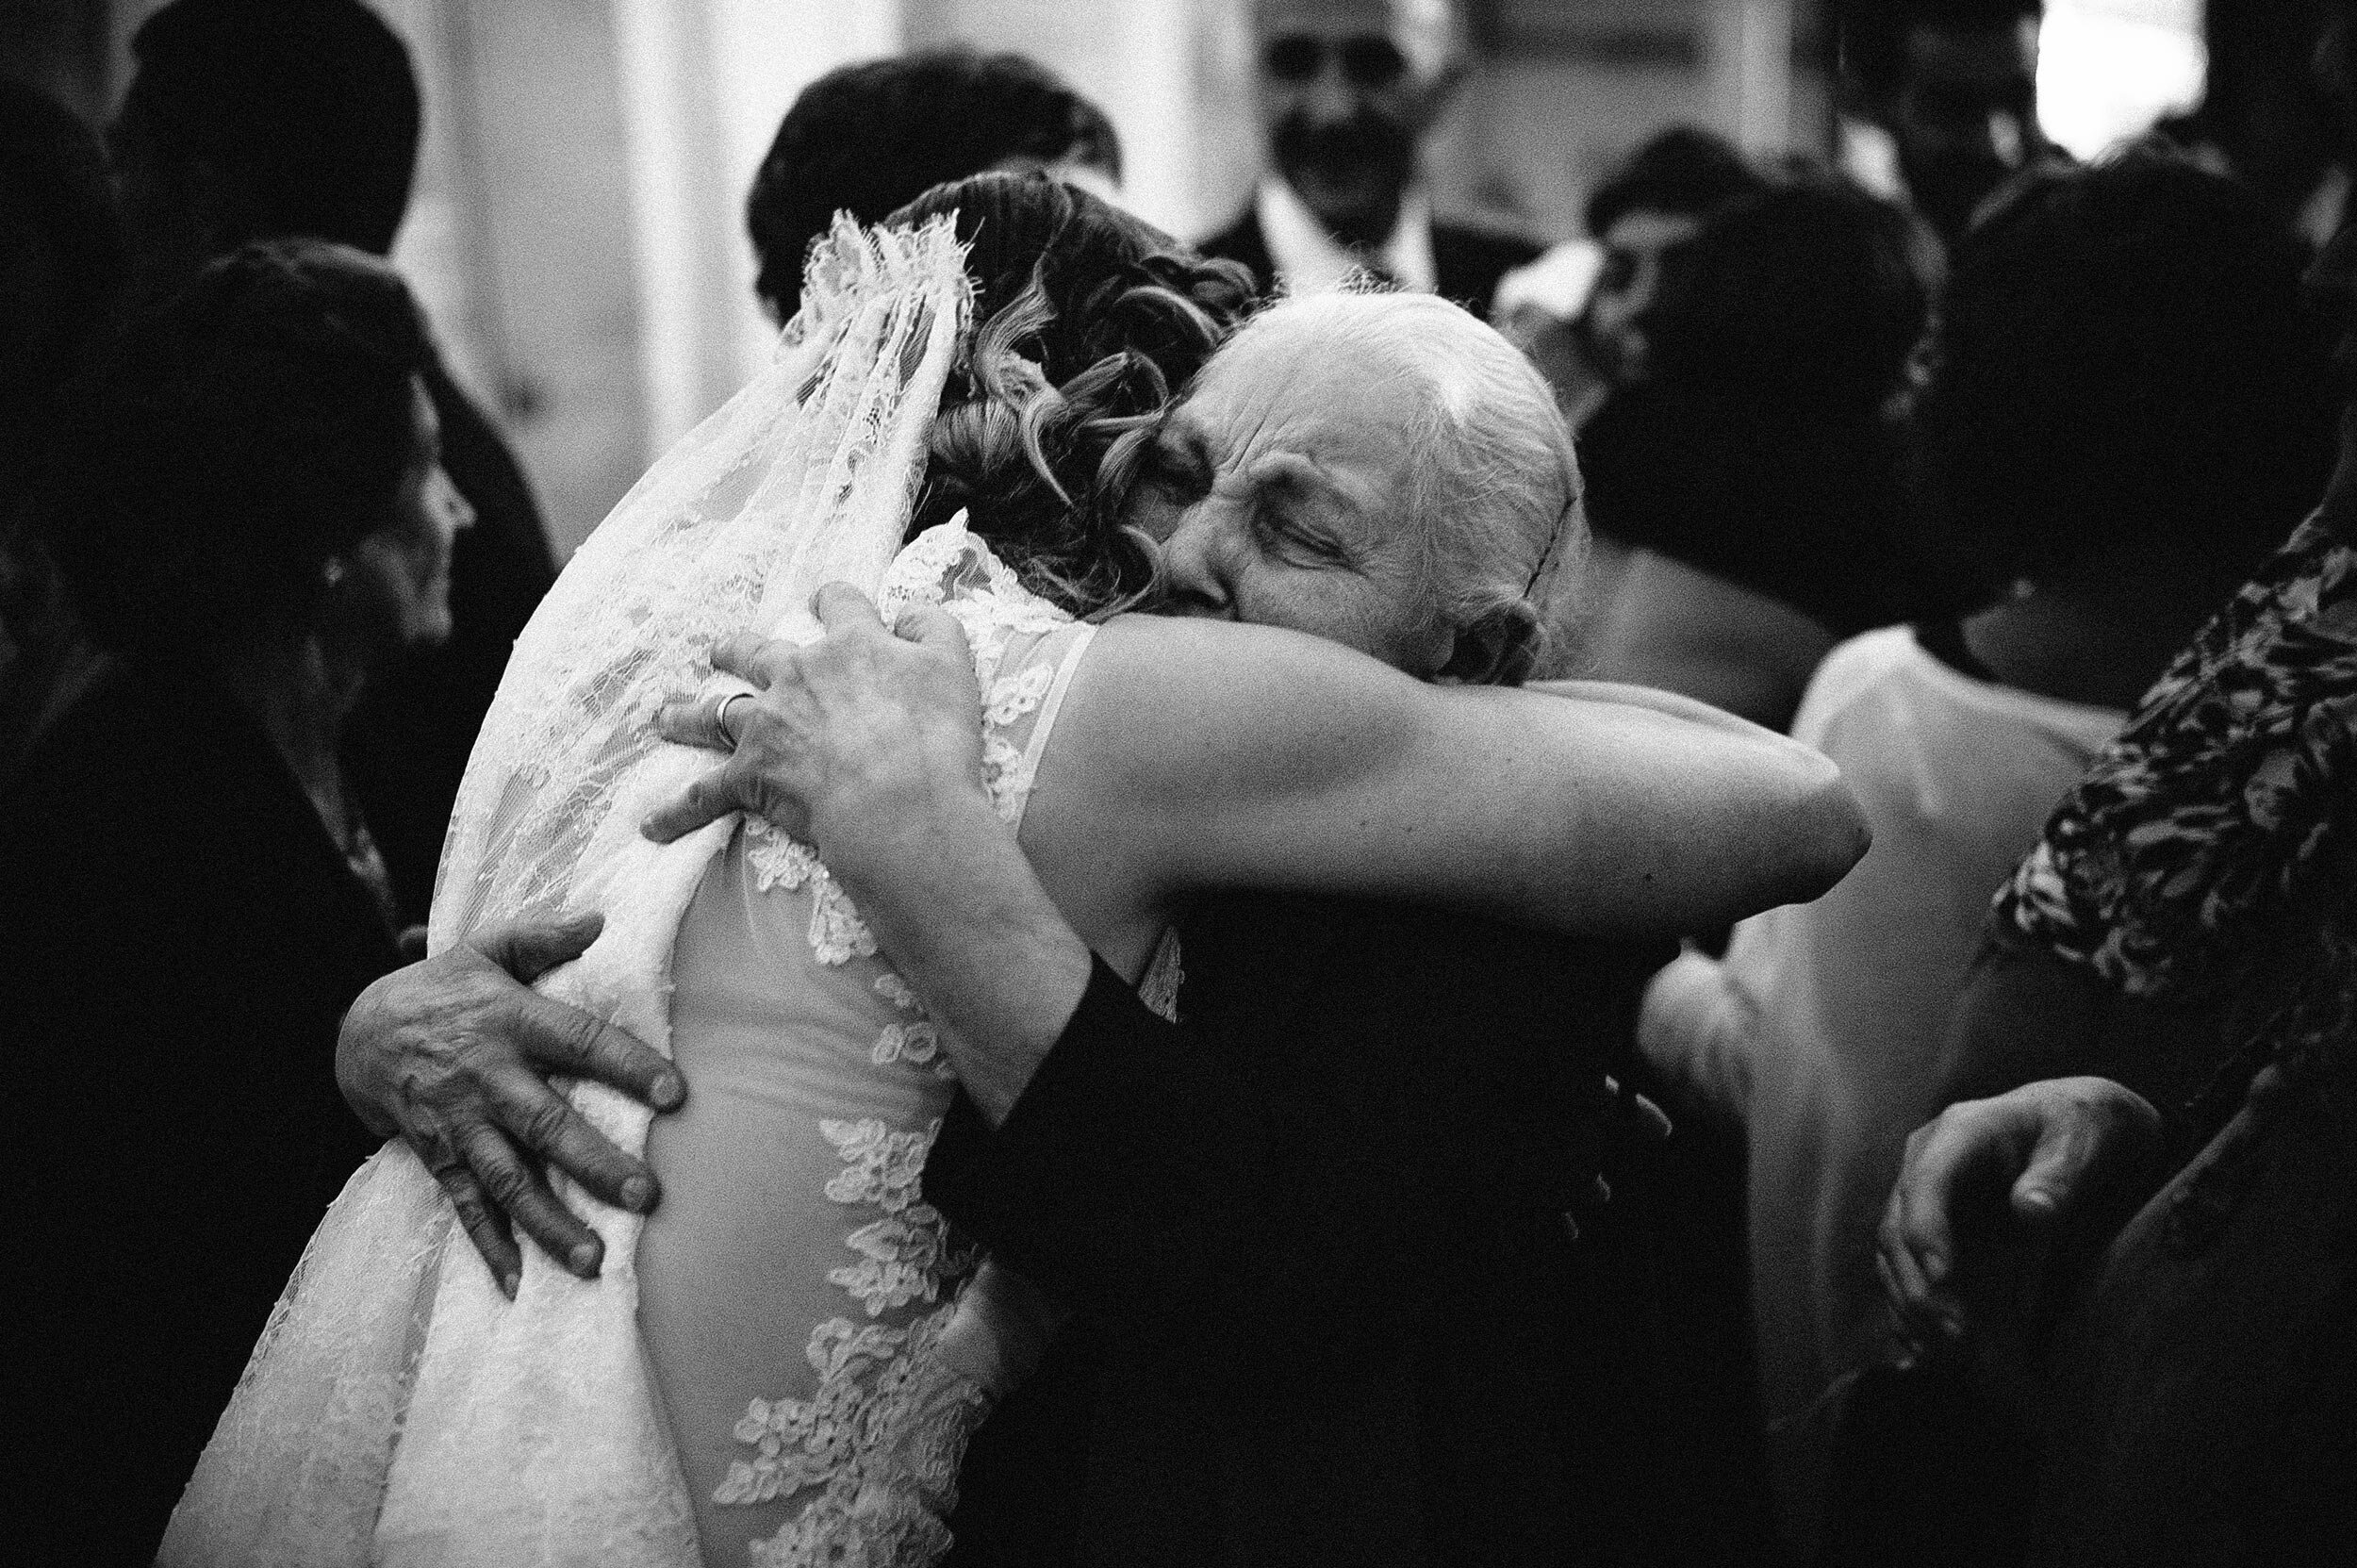 the-bride-hugs-her-grandmother-after-the-reception-italy-black-and-white-wedding-photography.jpg